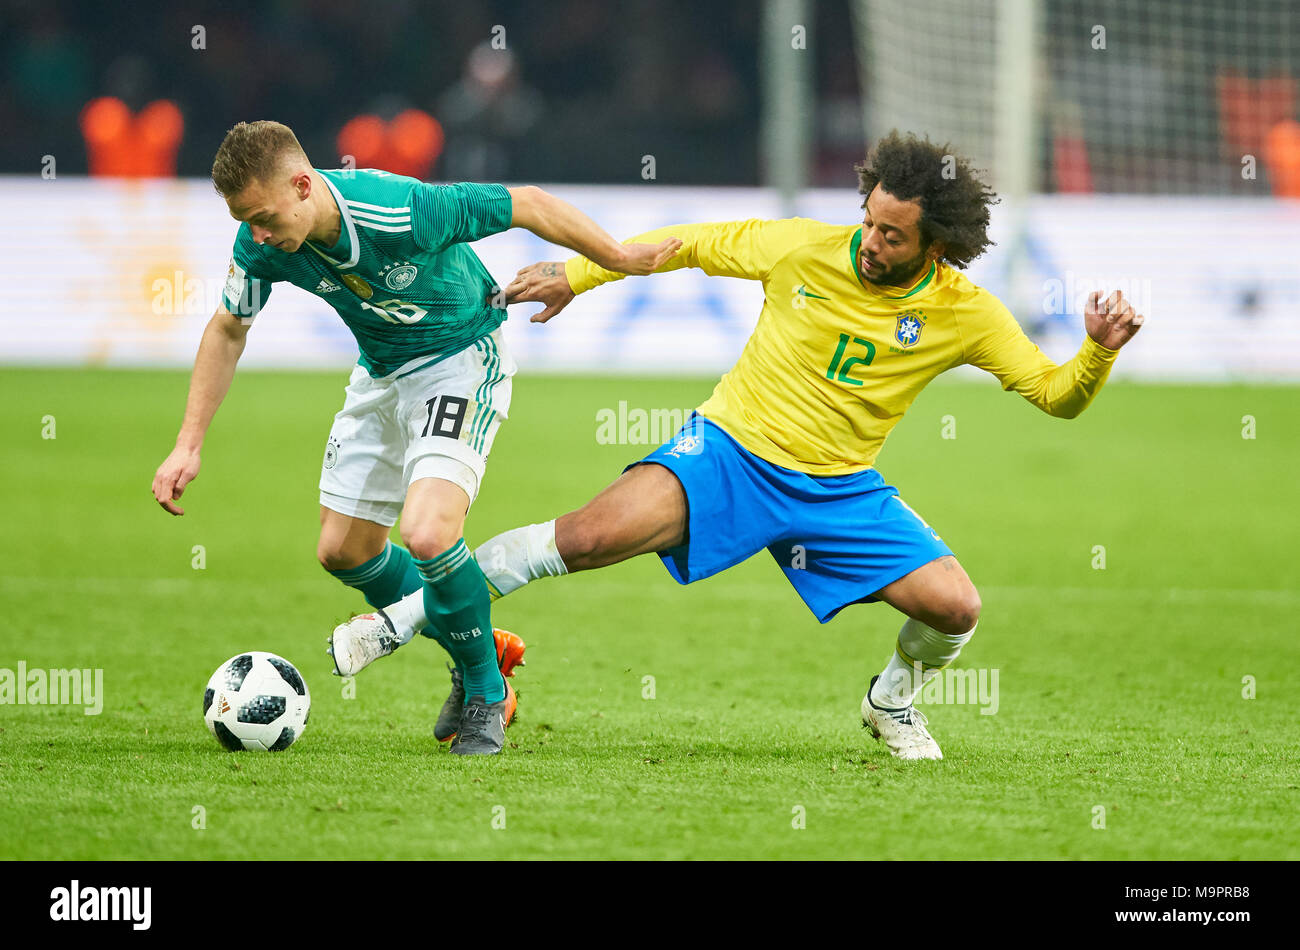 Berlin, Germany. 27th Mar, 2018. DFB-ESP Football Test, Berlin, March 27, 2018 Joshua KIMMICH, DFB 18  compete for the ball against  MARCELO, BRA 12  GERMANY - BRASIL 0-1 Soccer World Cup Russia Test match , Berlin, March 27, 2018,  Season 2017/2018  © Peter Schatz / Alamy Live News Stock Photo